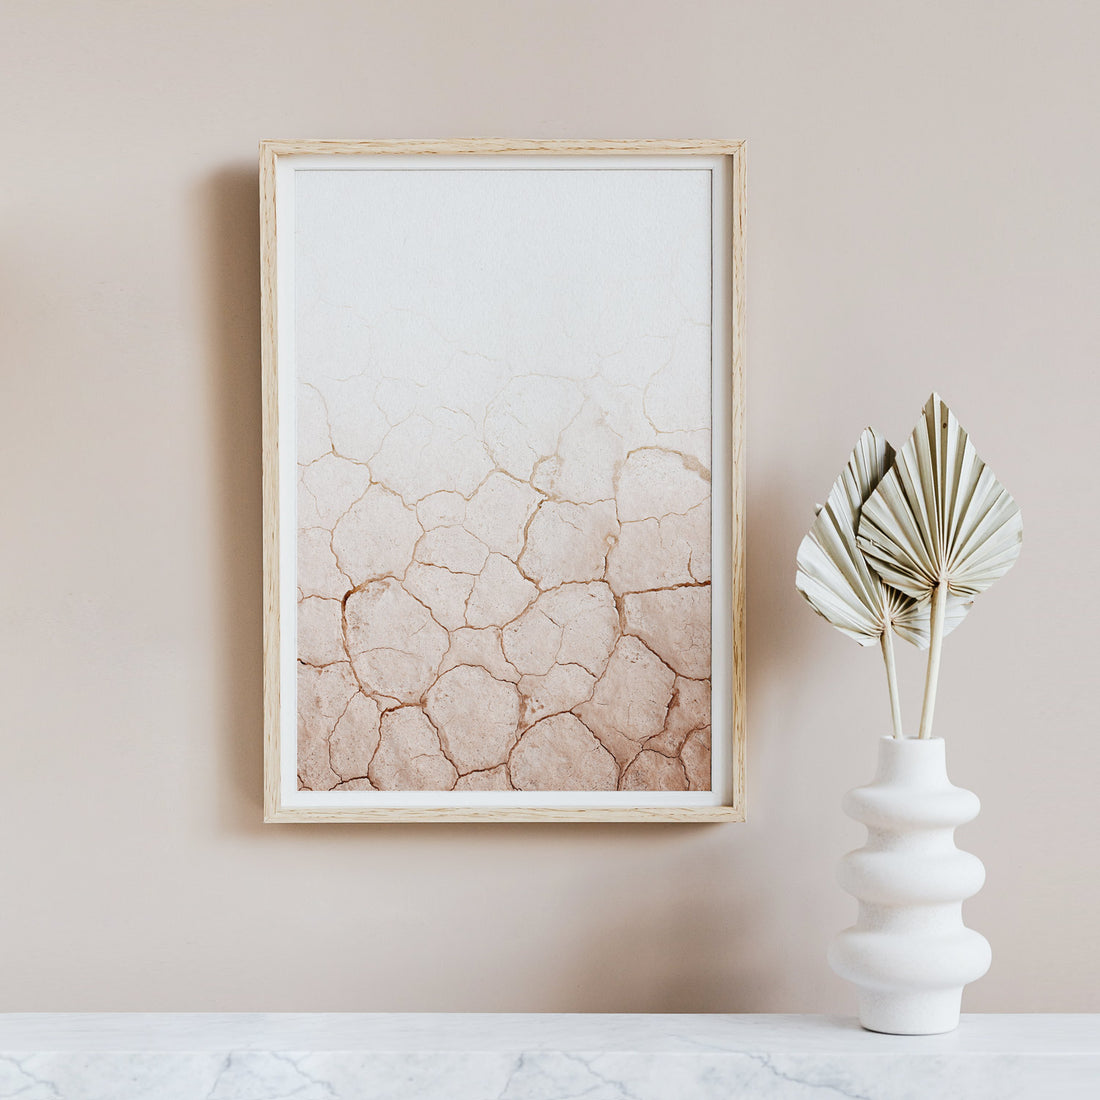 interior with ombre desert inspired wall art poster